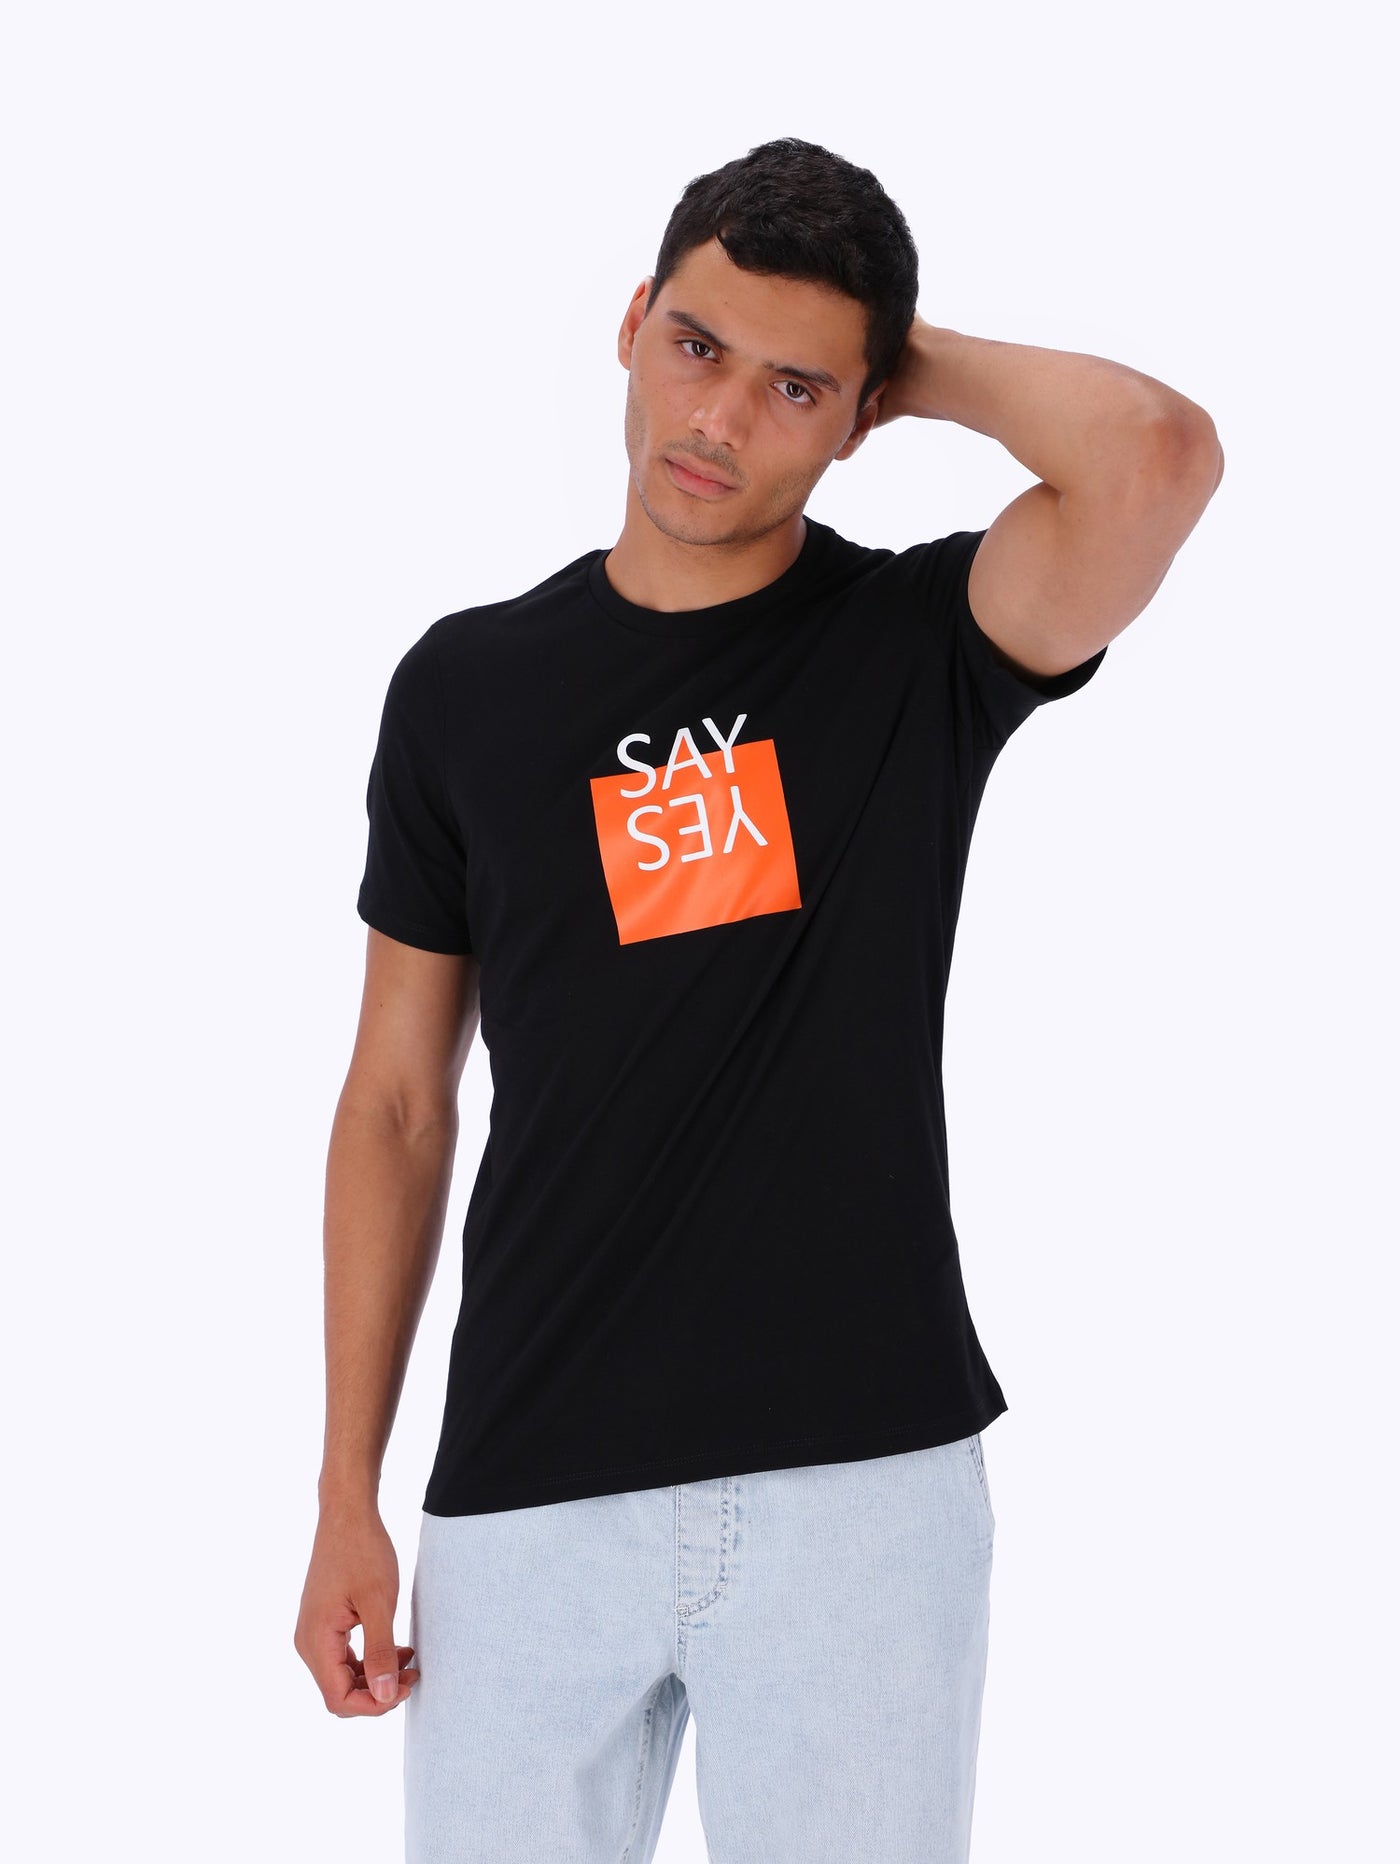 OR Men's Say Yes Print Crew Neck T-Shirt